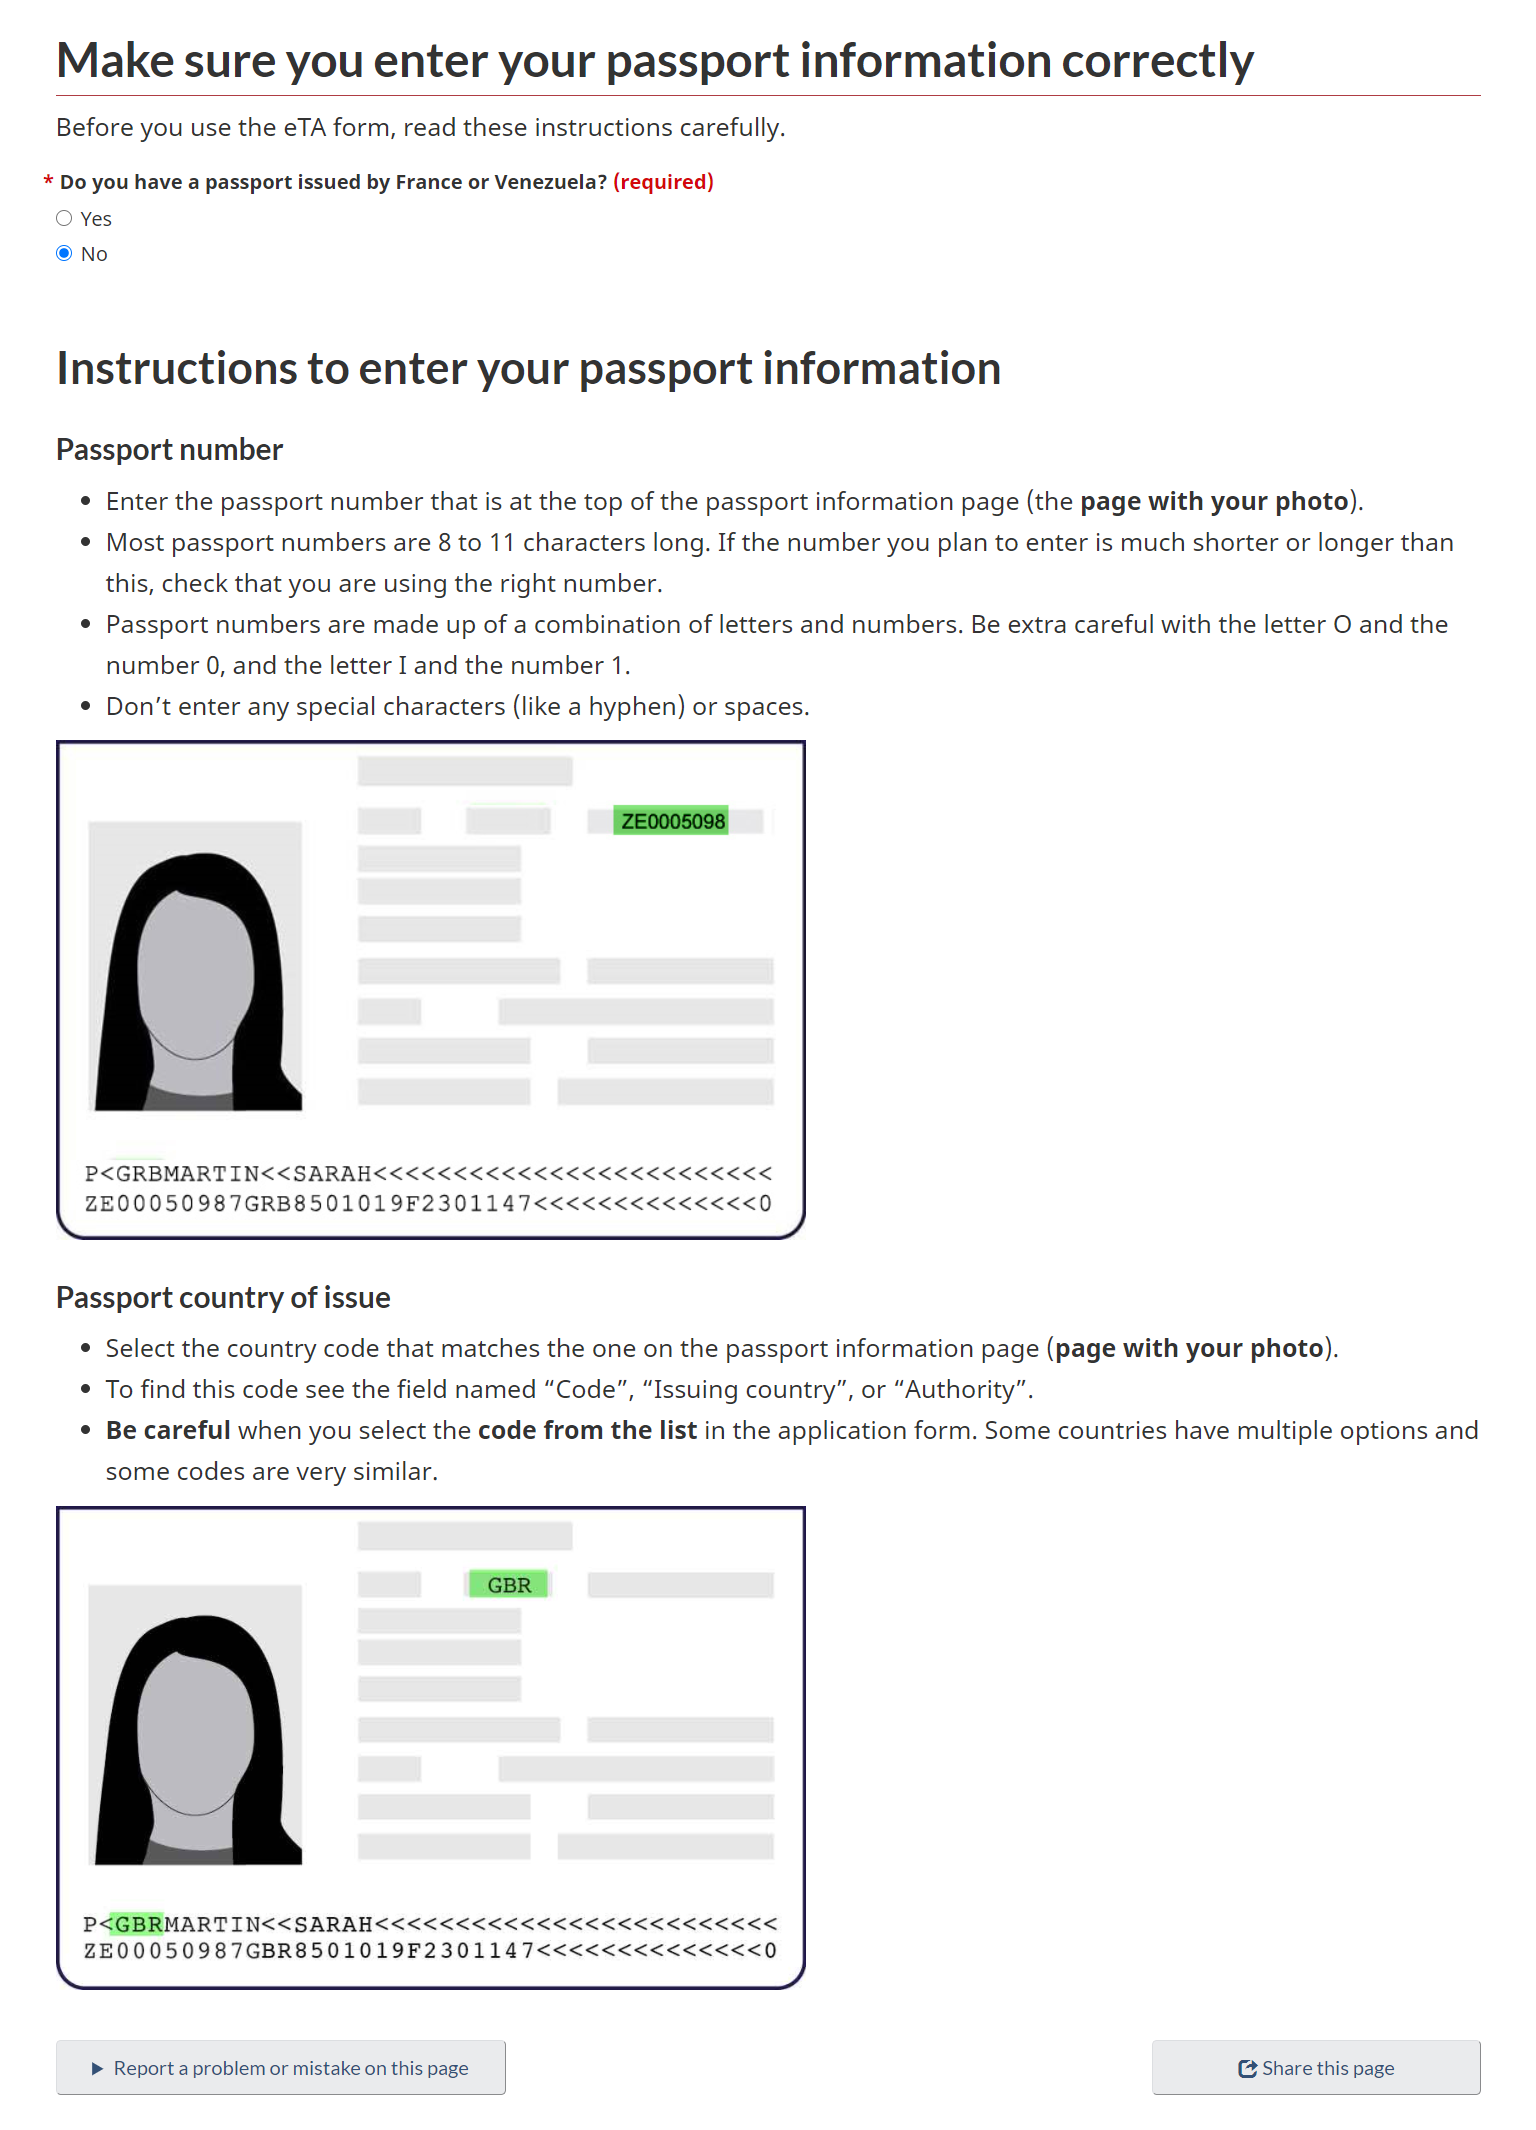 Instructions to enter your passport information